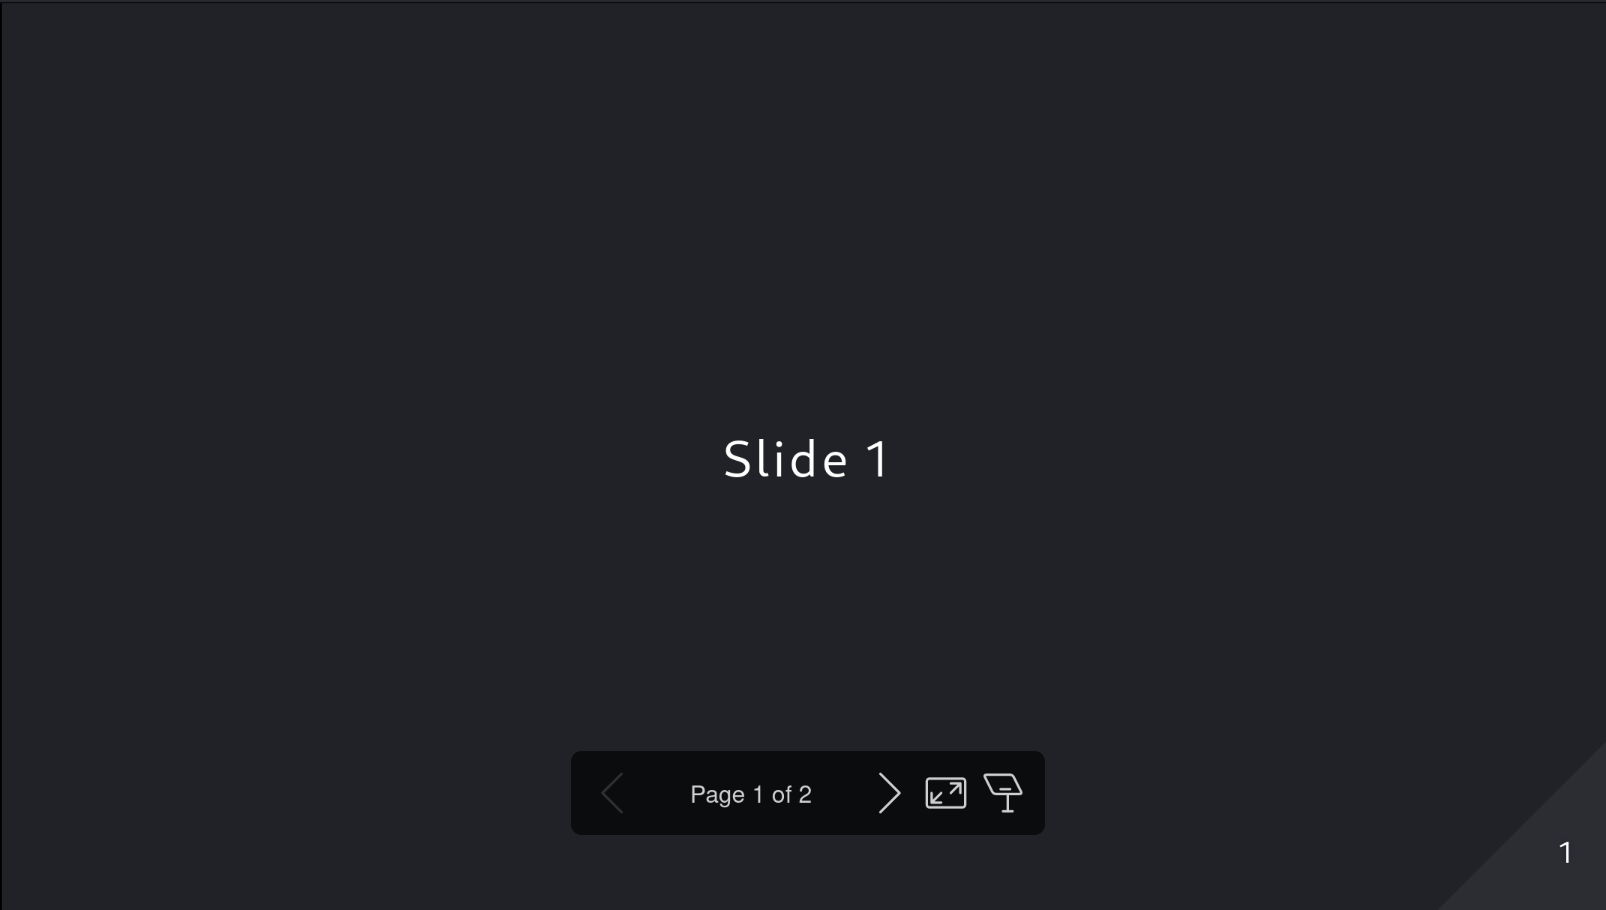 Dark theme presentation. The middle says 'Slide 1' and there are presentation controls at the bottom